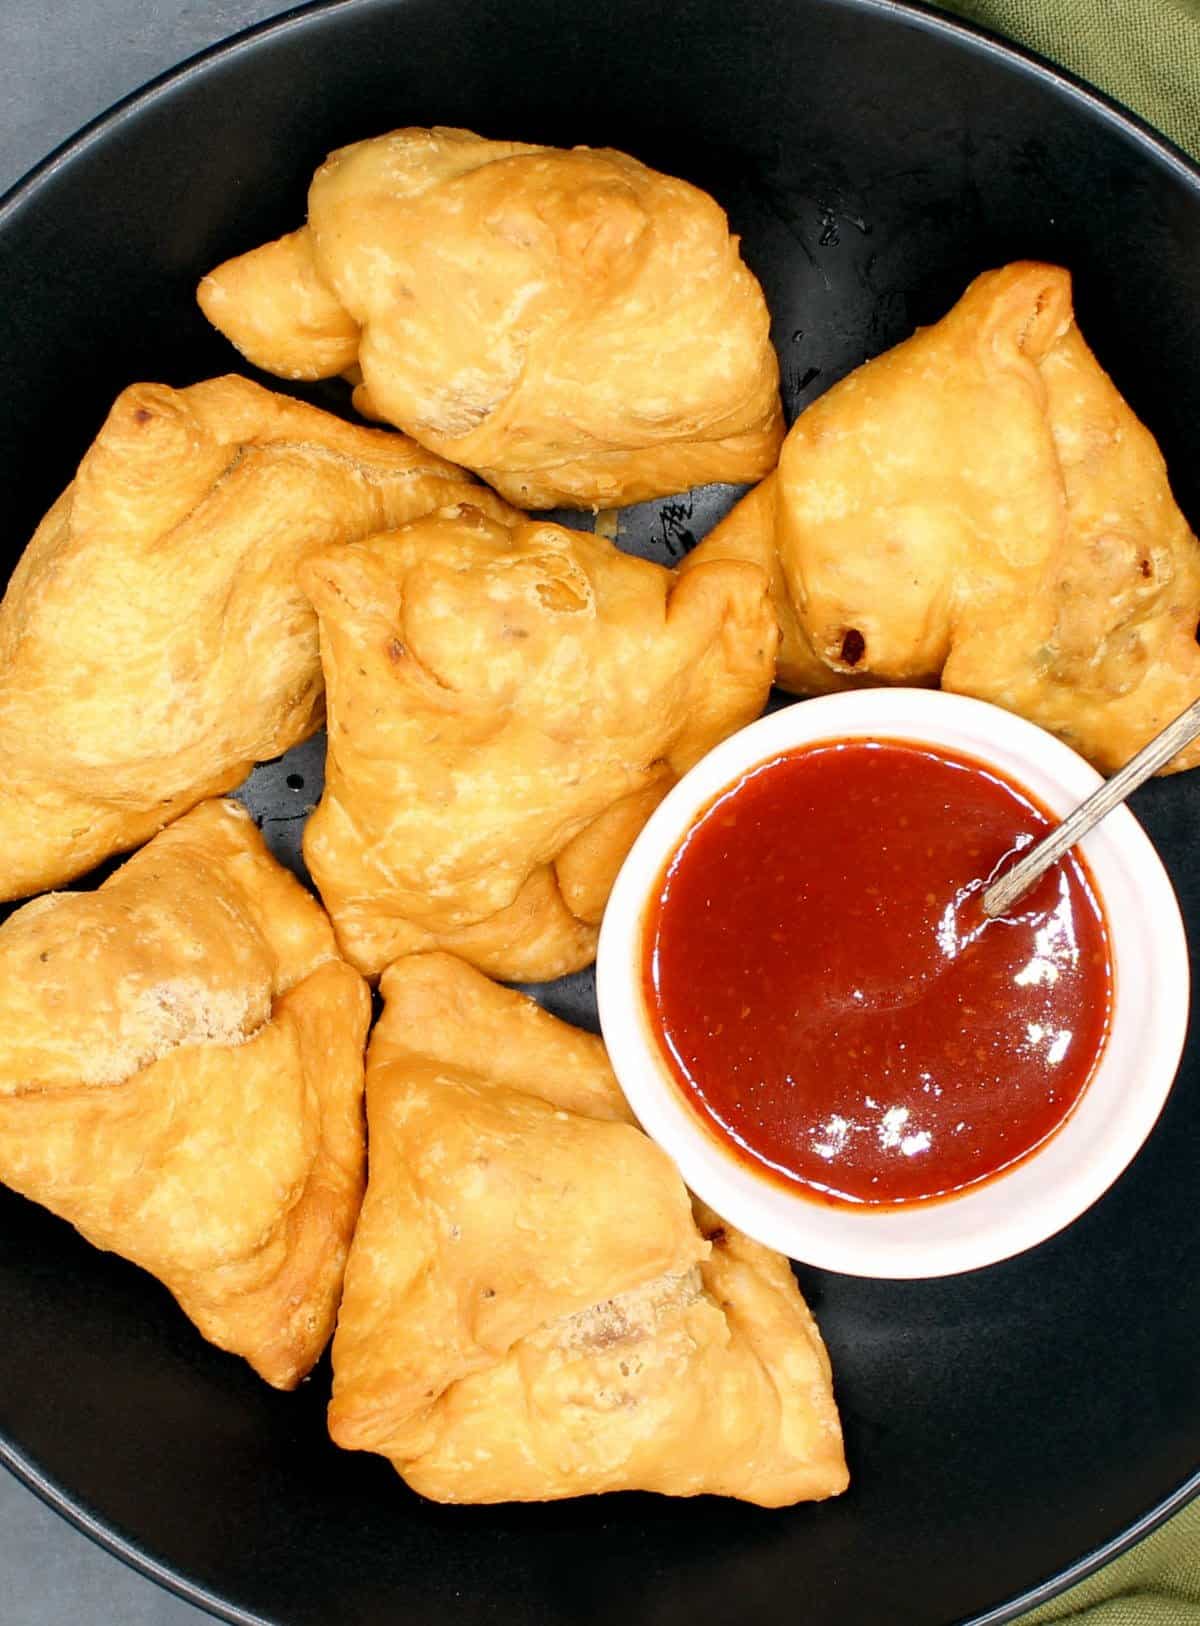 Six golden samosas on a black plate with ketchup in a bowl.